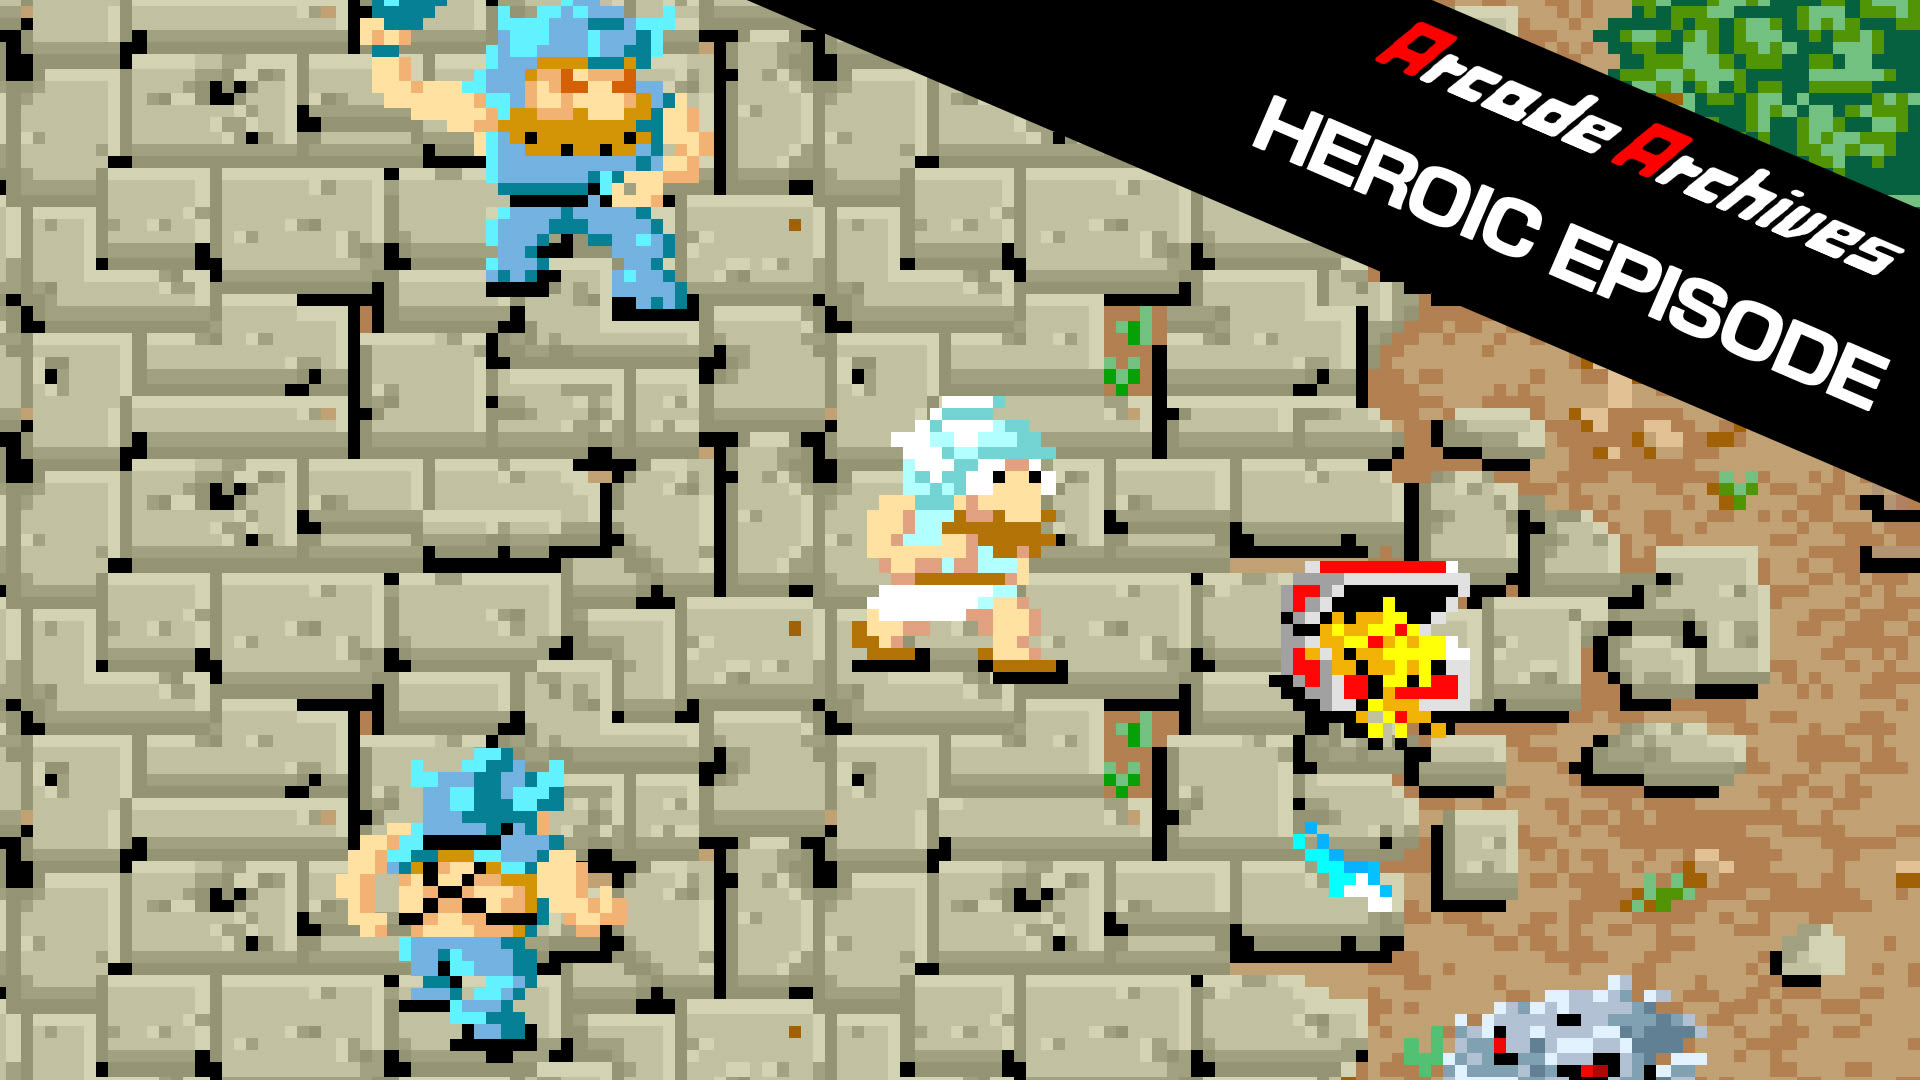 Arcade Archives HEROIC EPISODE